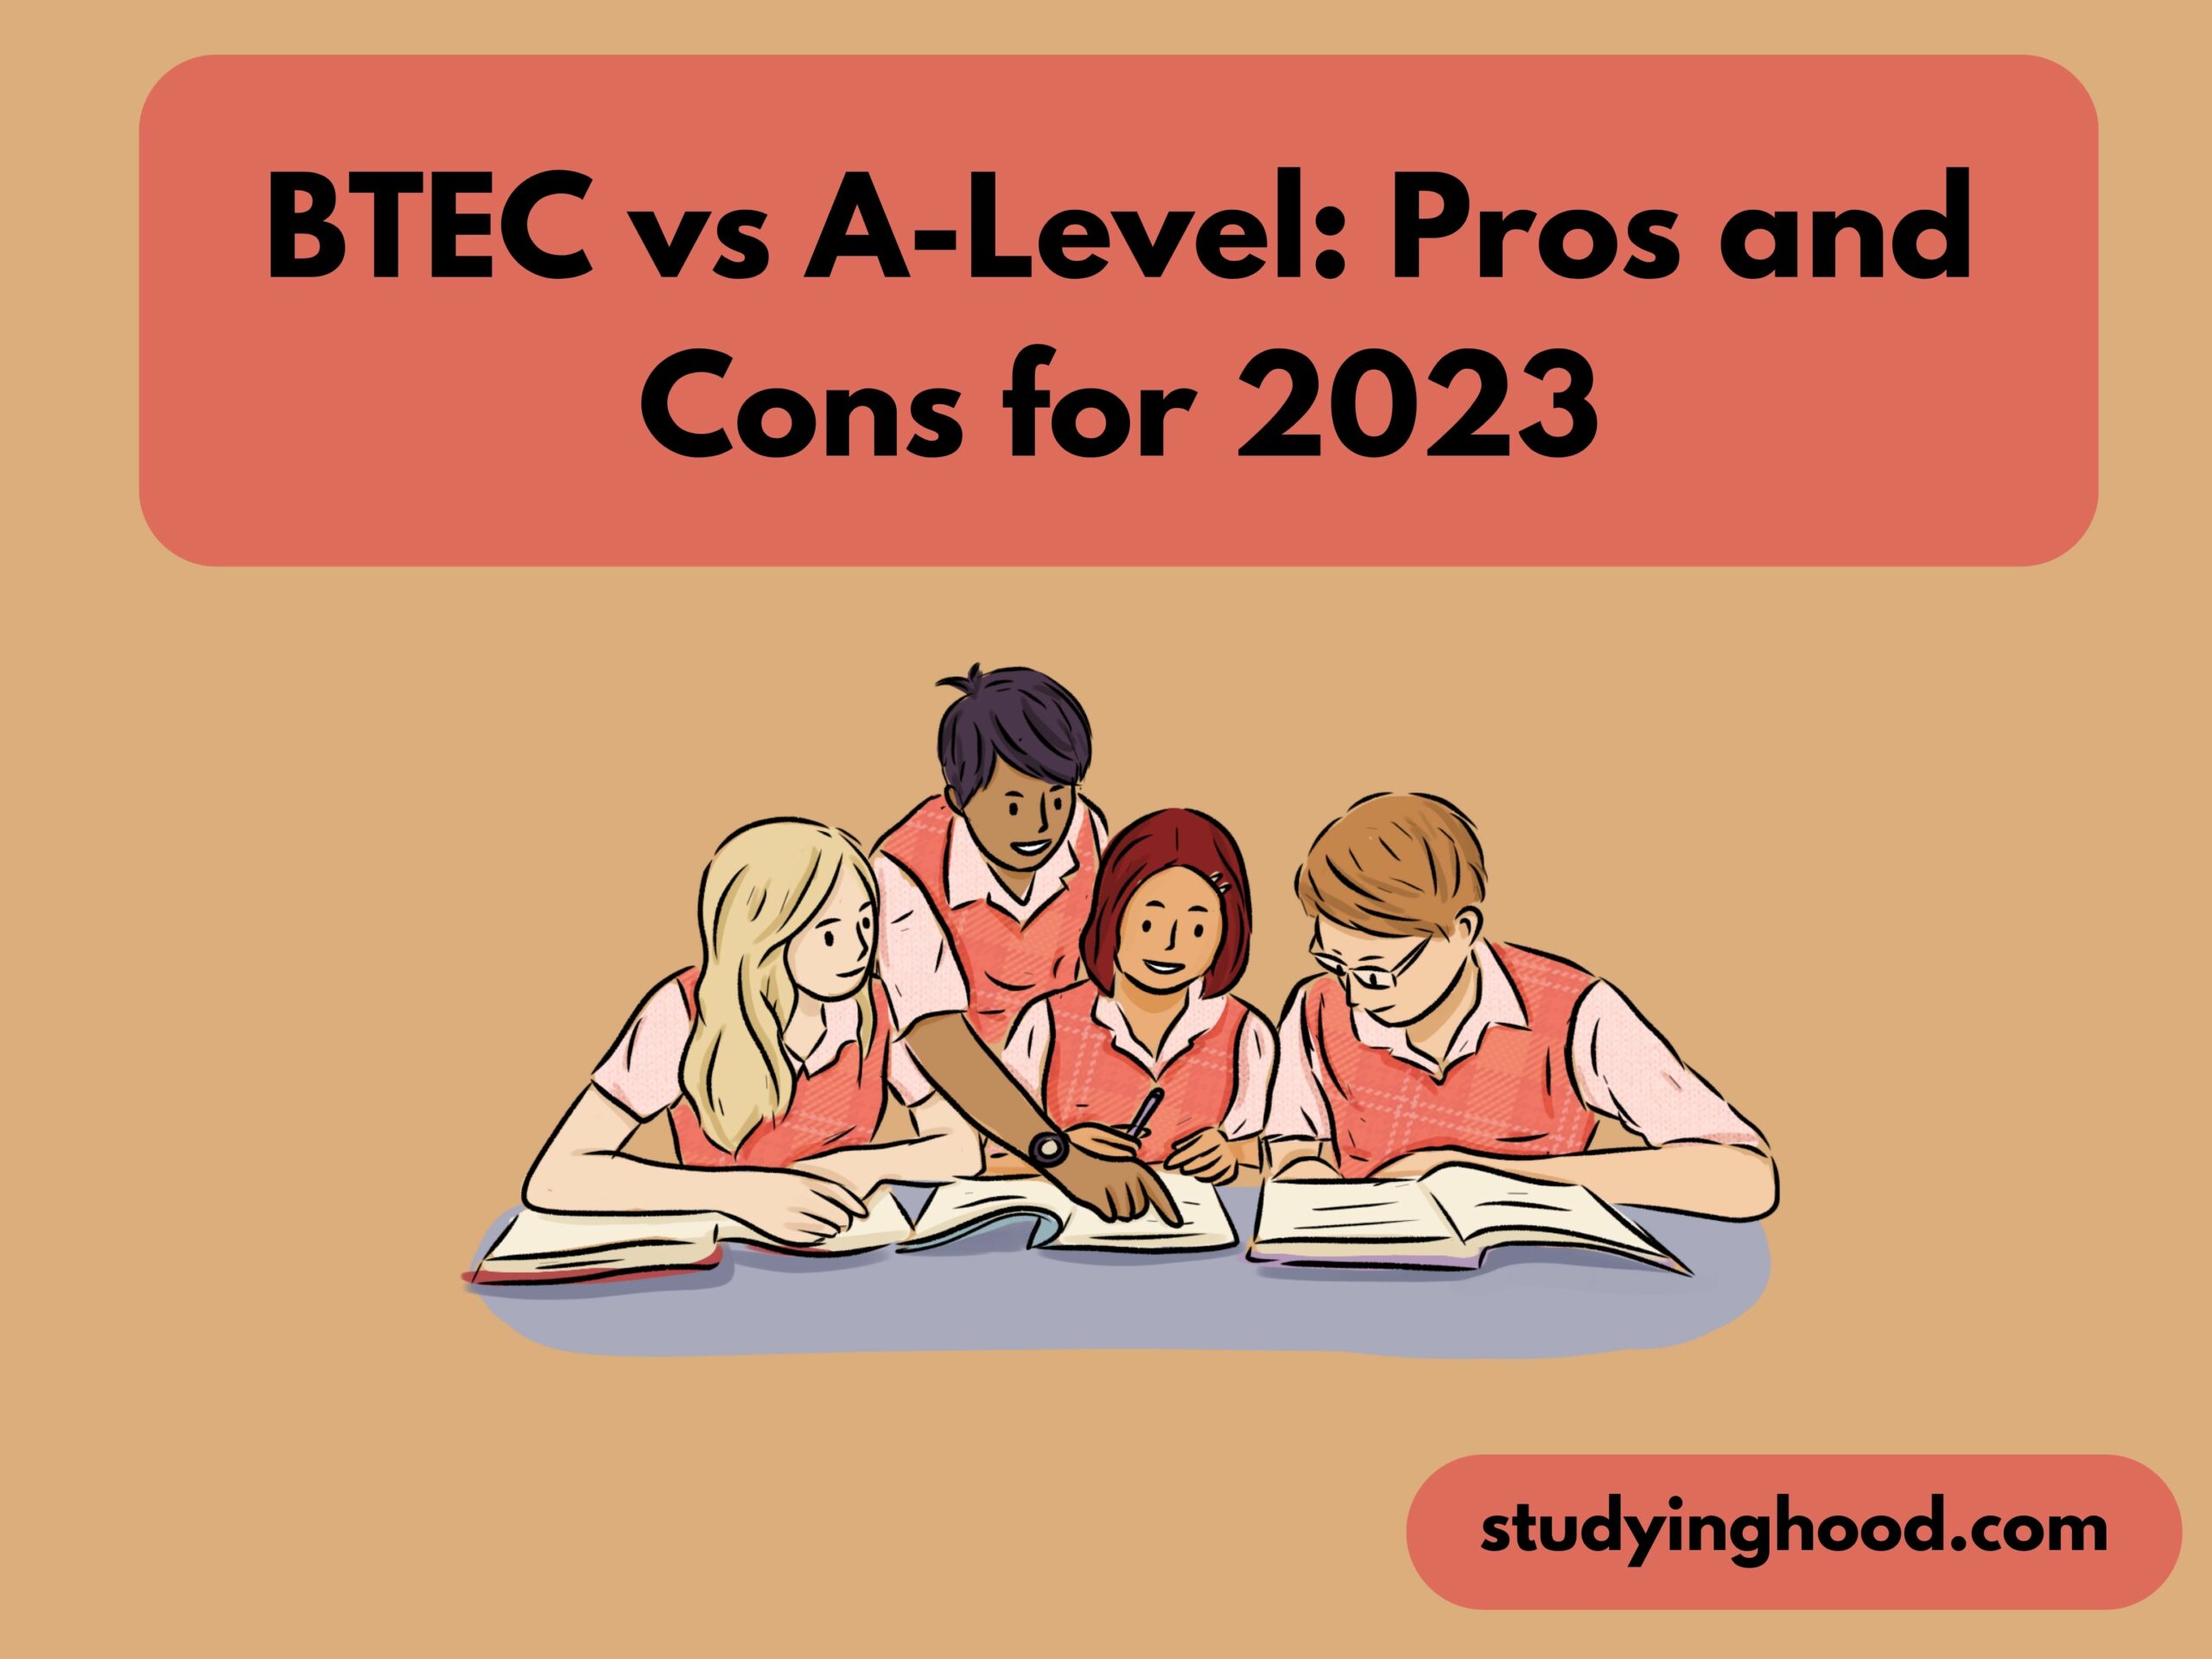 BTEC vs A-Level: Pros and Cons for 2023